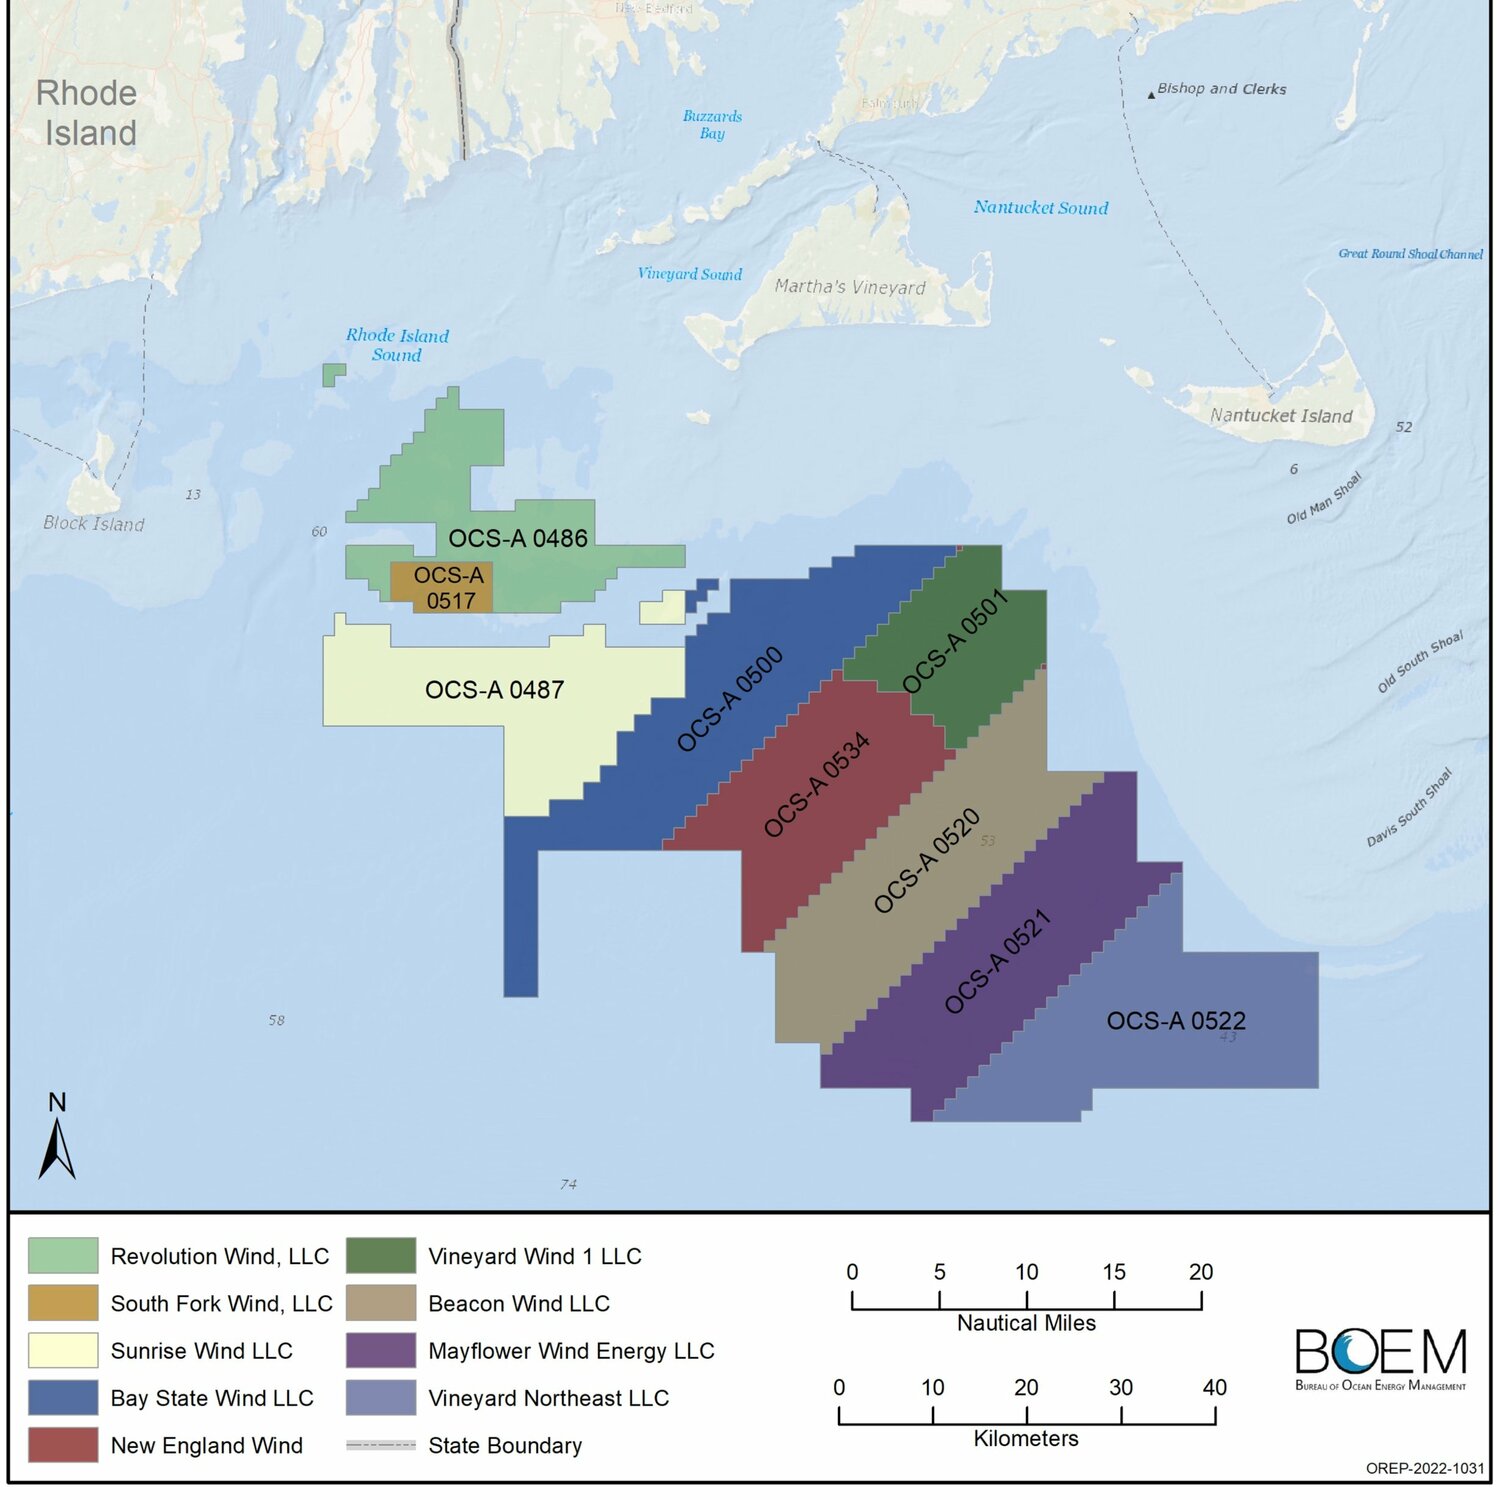 Federal waters south of Nantucket and Martha's Vineyard leased for offshore energy development. The Vineyard Wind lease area is in green closest to Nantucket.